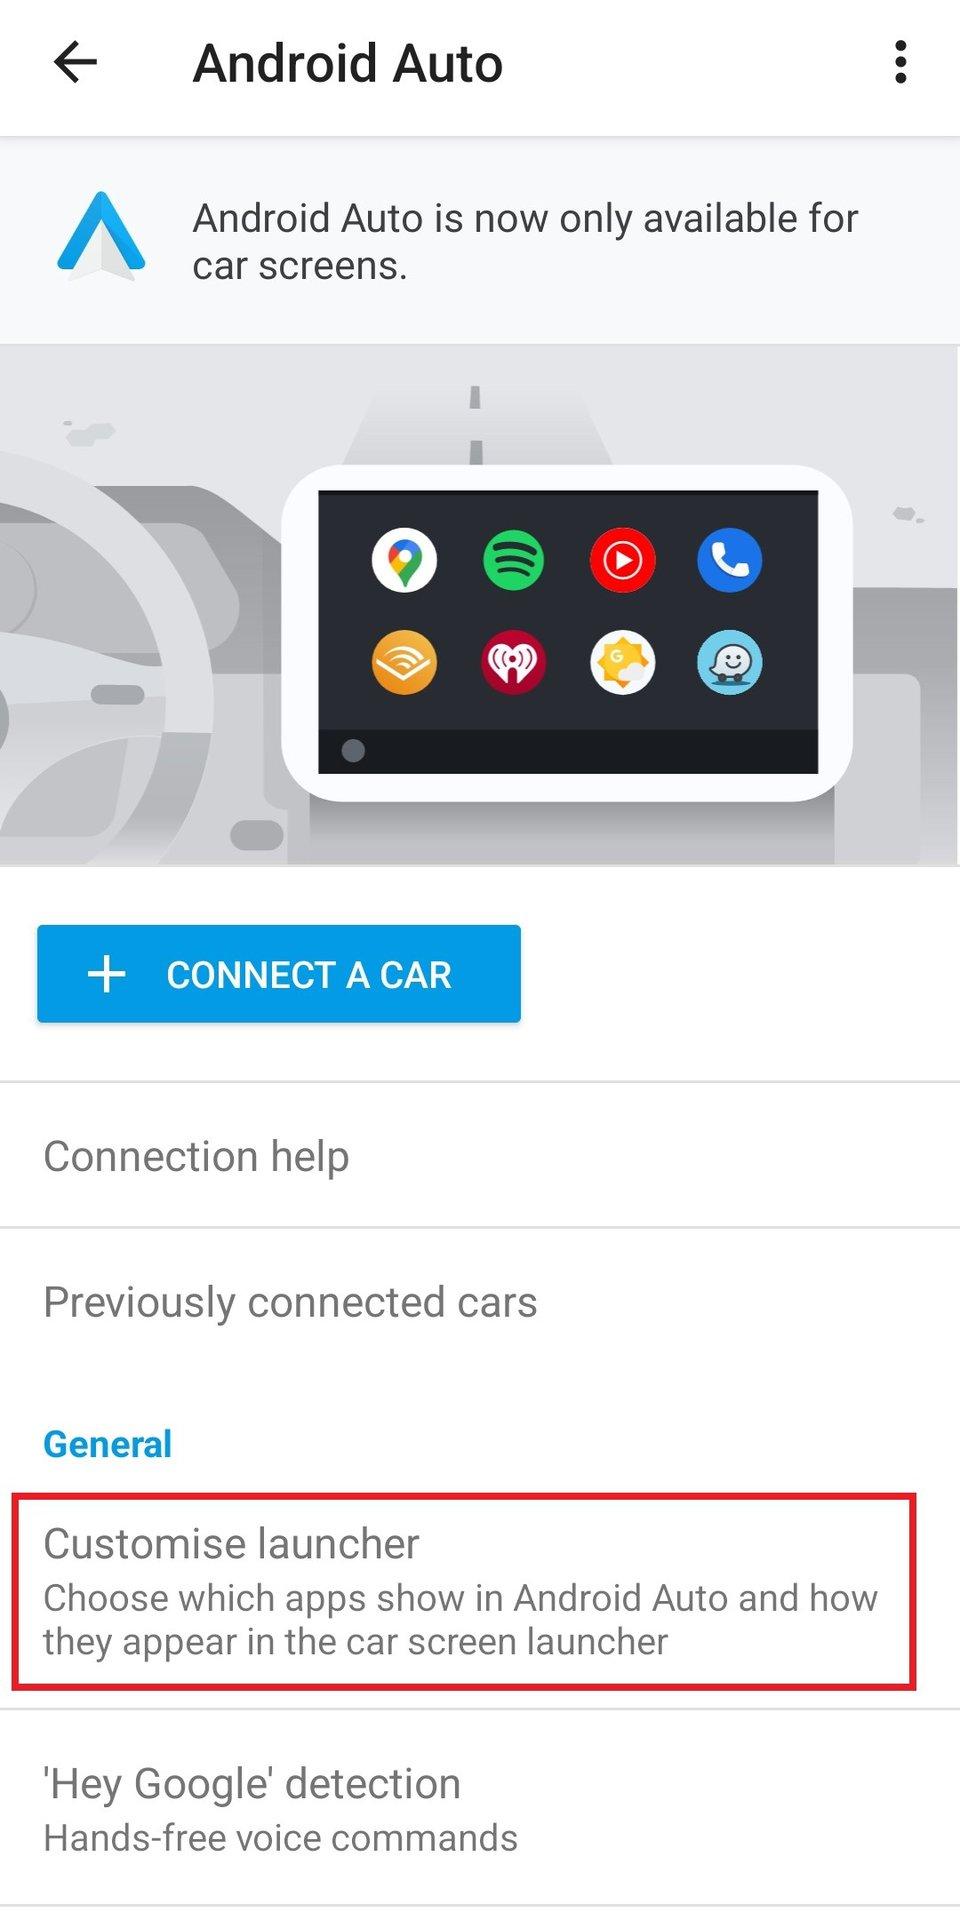 Customize your Android Auto launcher